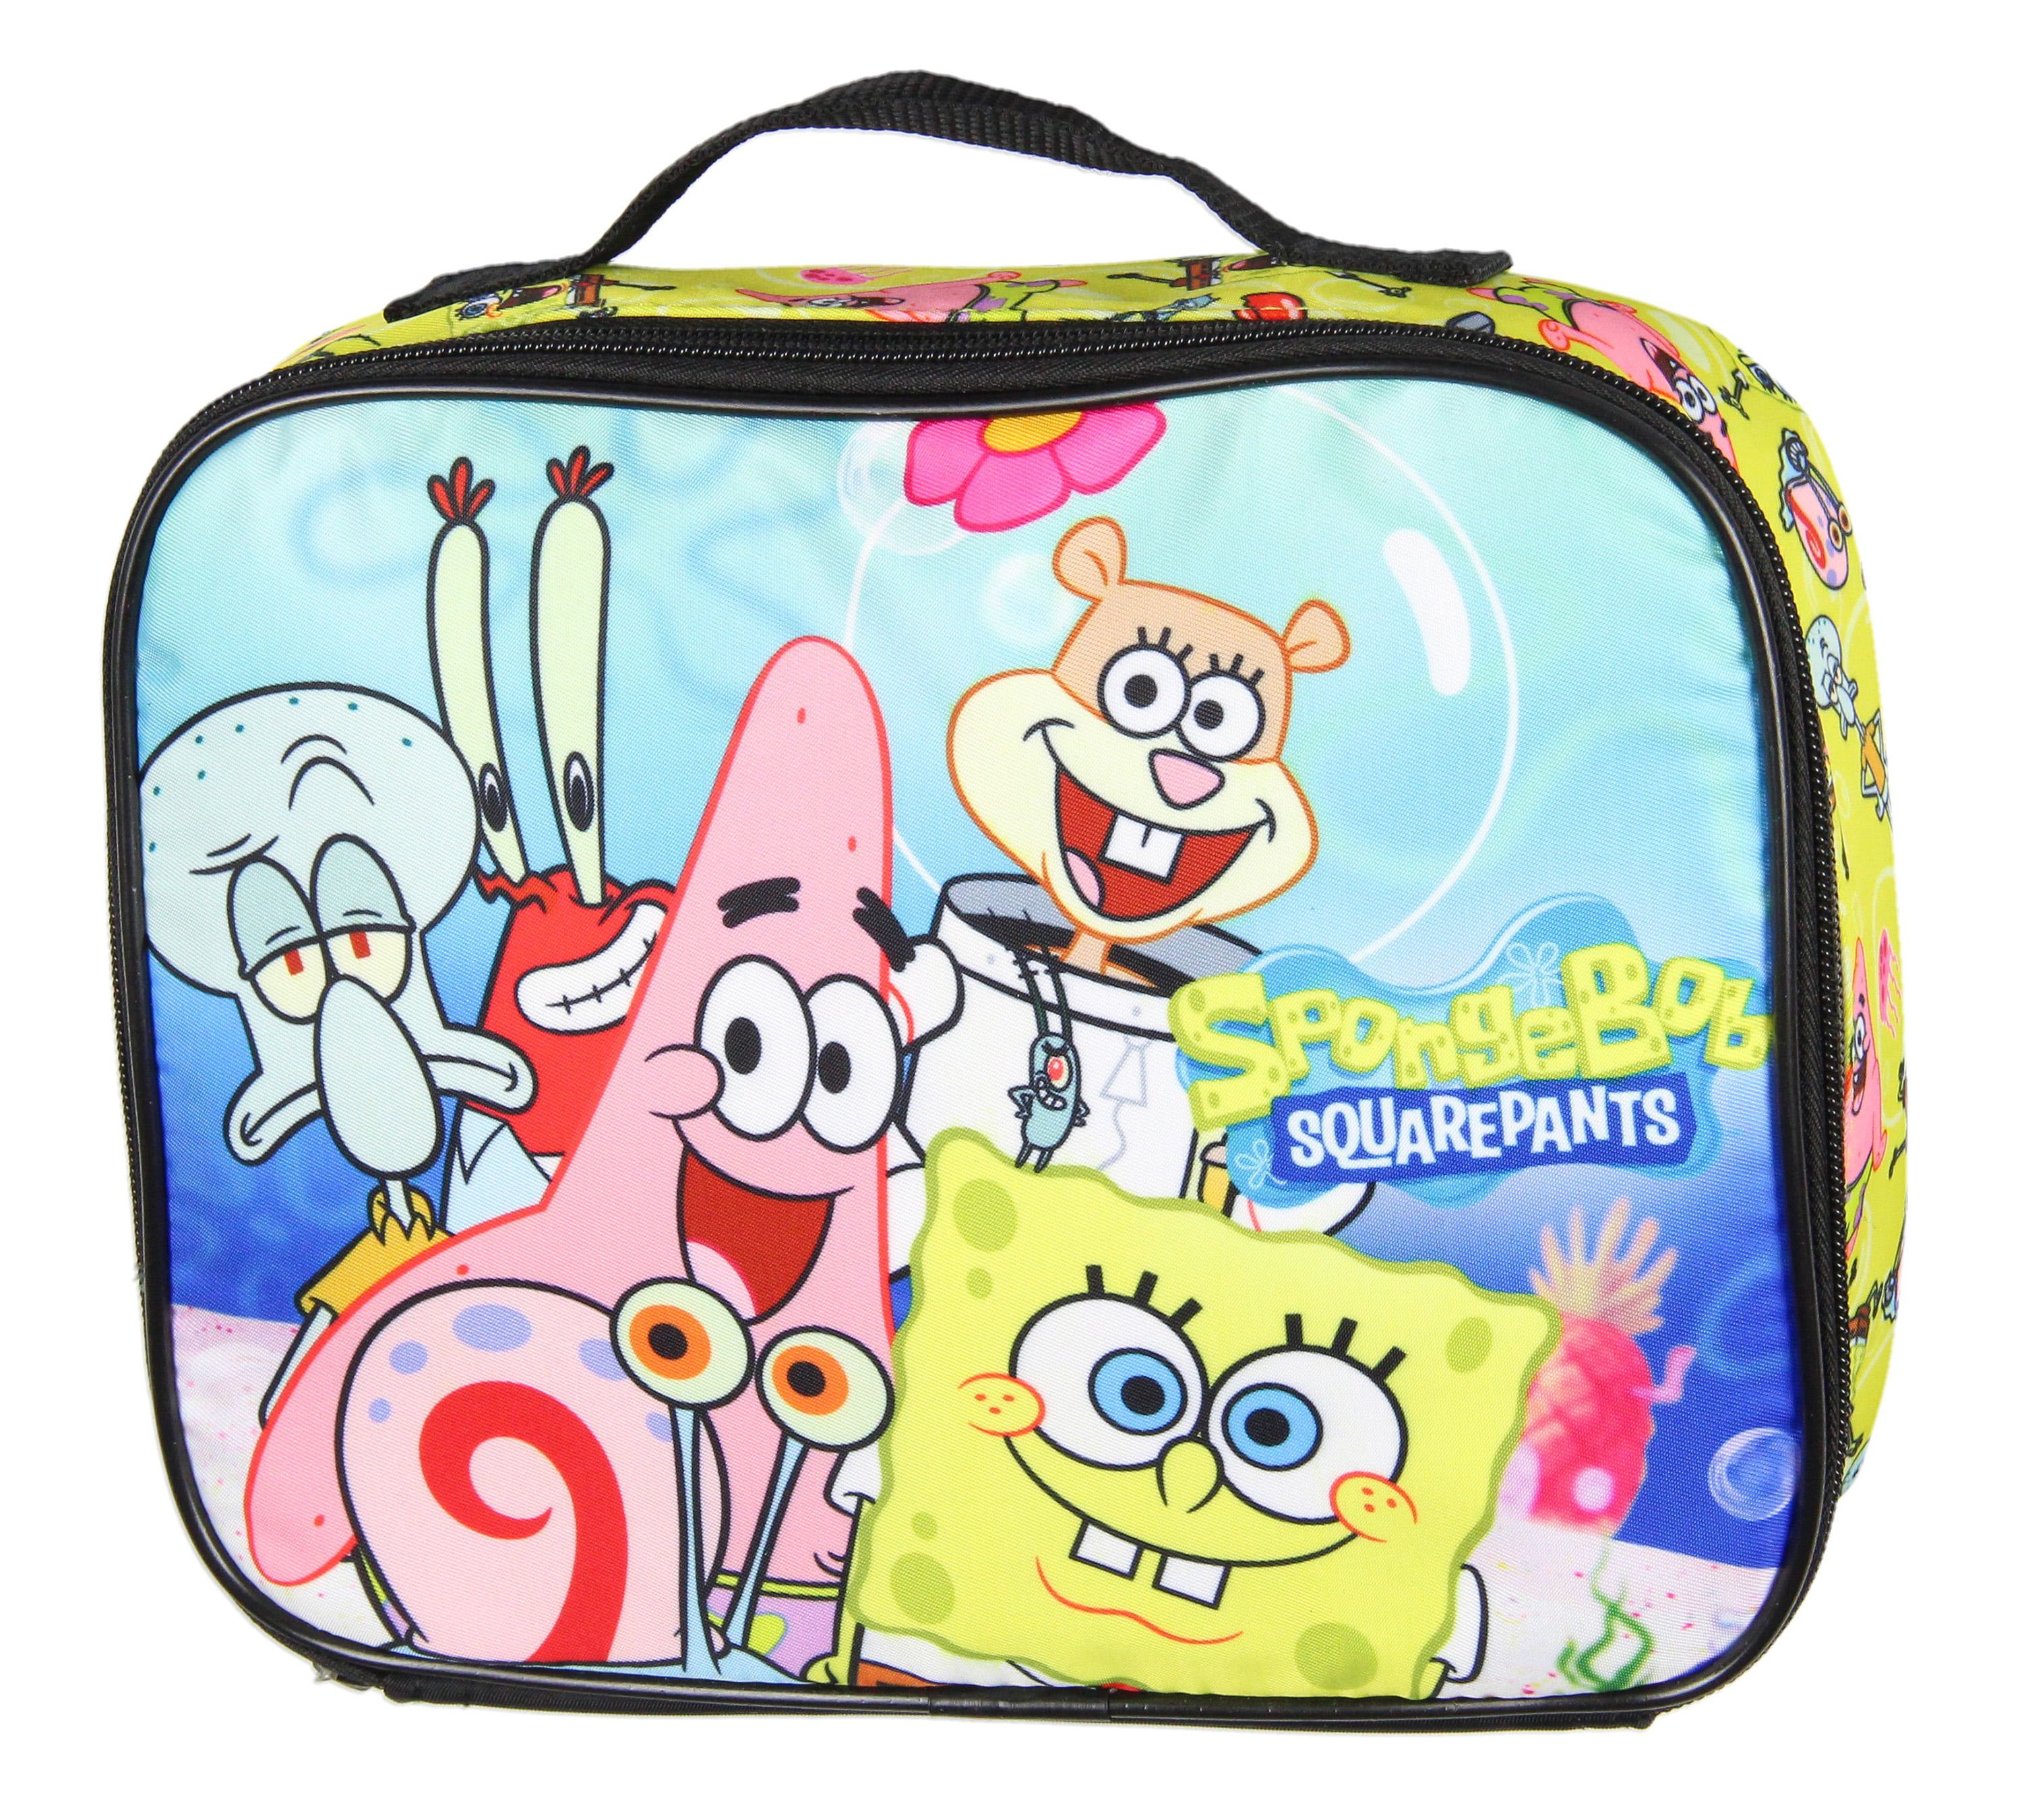 Spongebob SquarePants Lunch Box Patrick Star 3D Character Dual Compartment Insulated Lunch Bag Tote